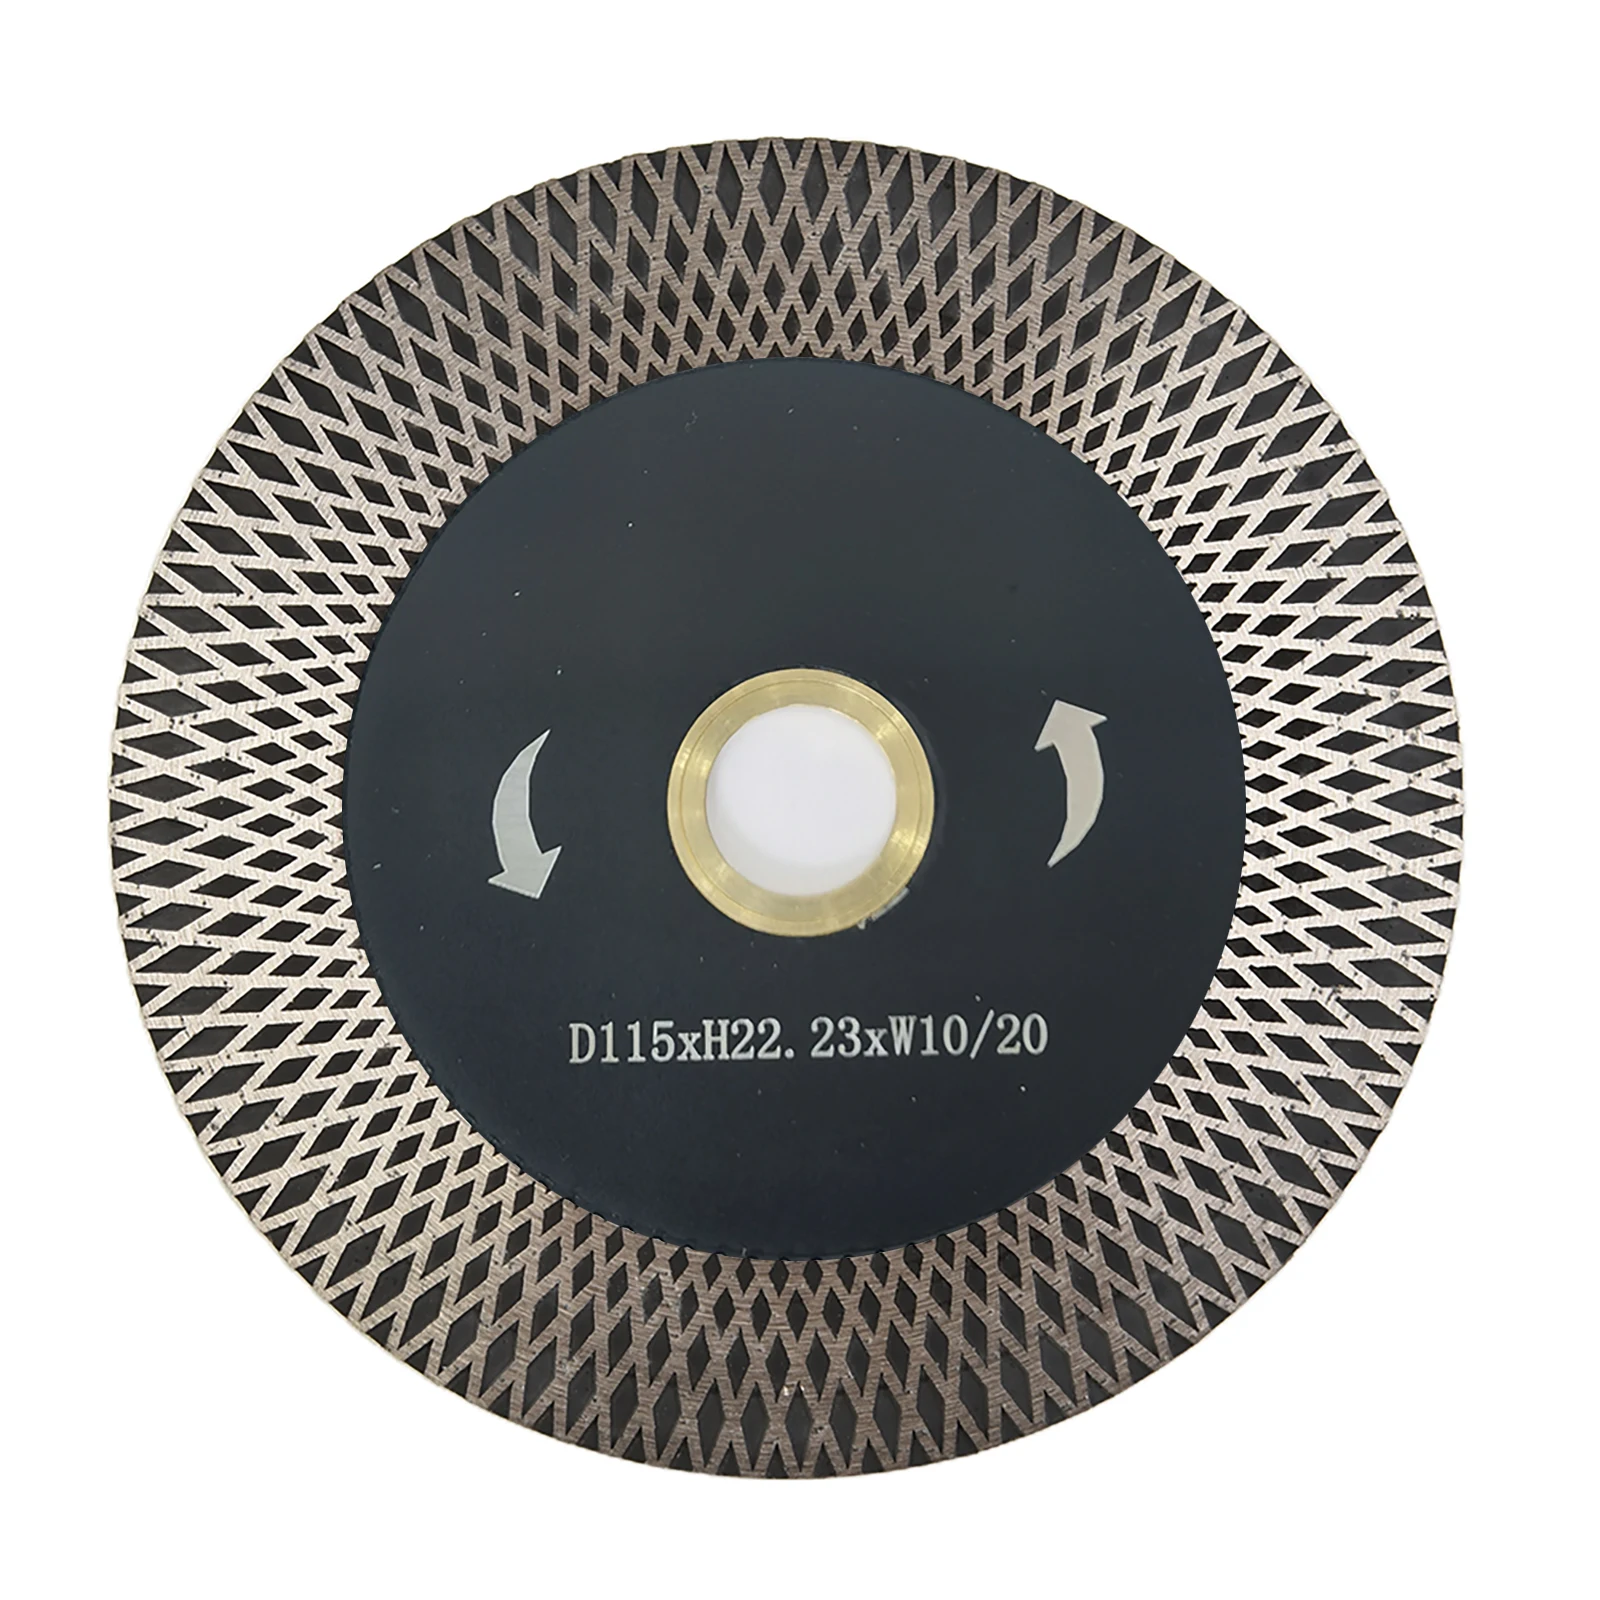 115mm Diamond Saw Blade Circular Cutting Disc Grinding Wheel For Ceramic Tile Granite Marble Cutter Angle Grinder Accessories